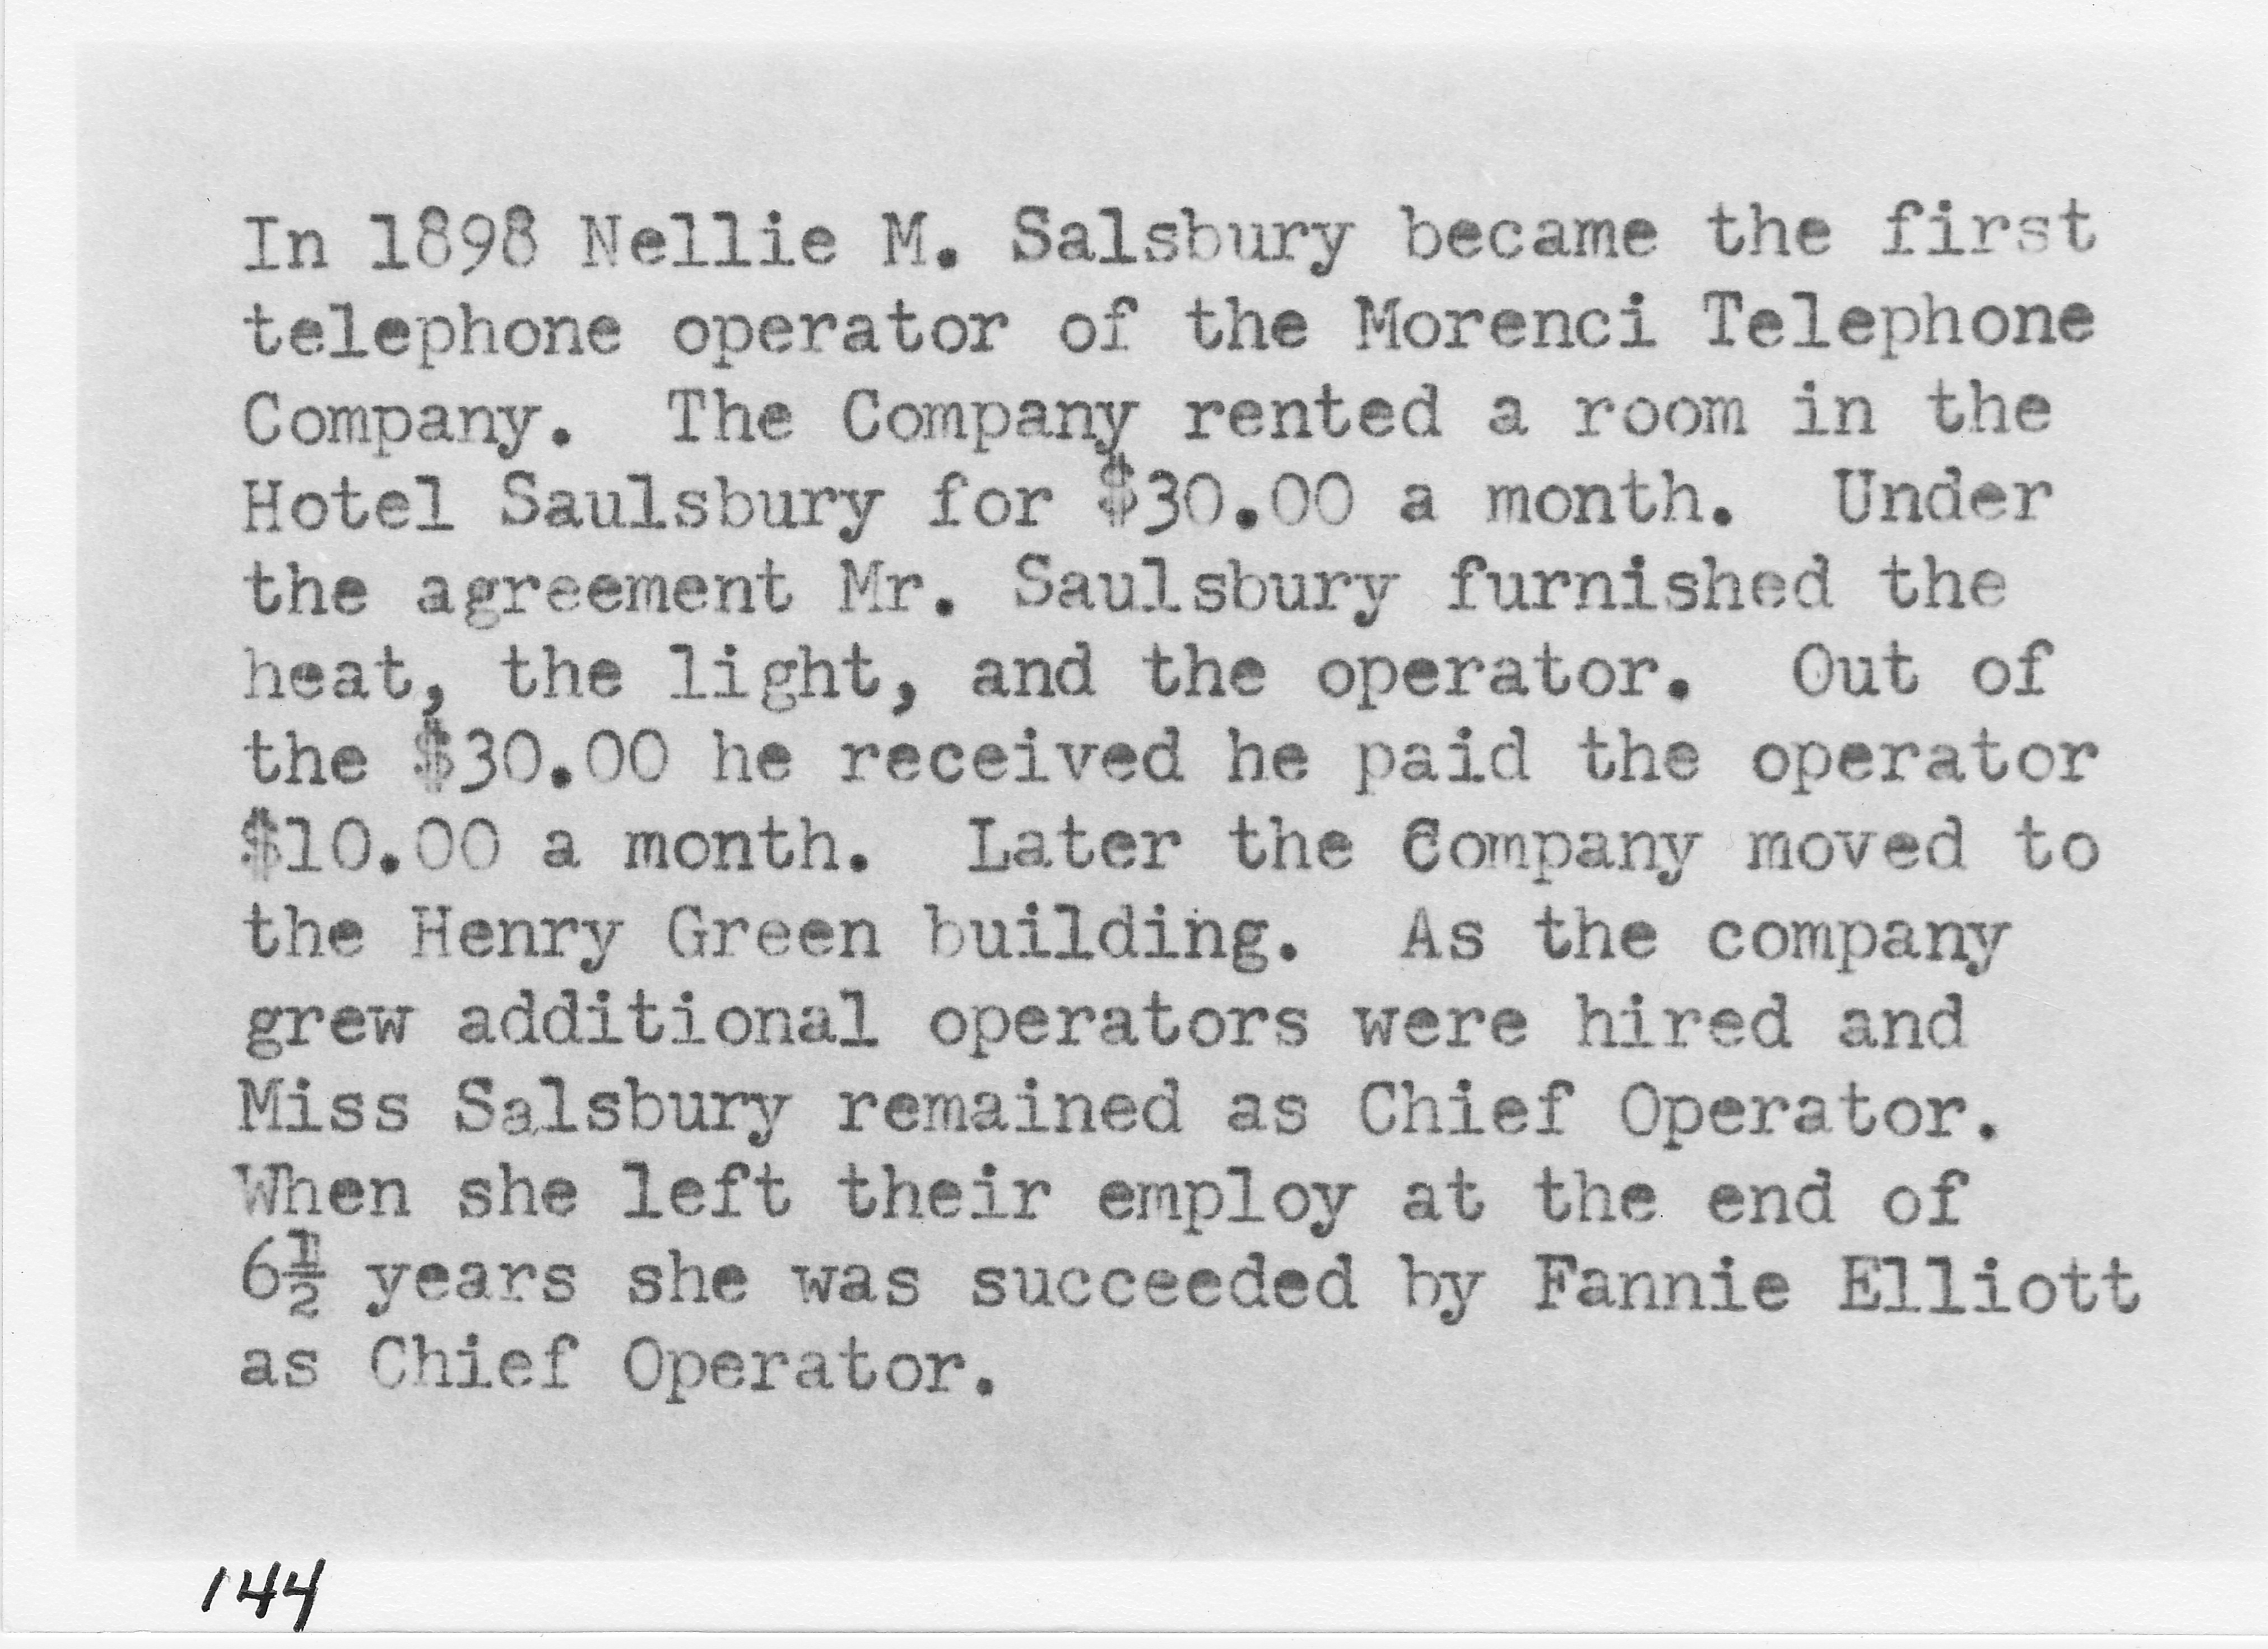 First telephone switchboard in Morenci, located on the second floor public room of Hotel Saulsbury. Nellie M. Saulsbury was the first operator.